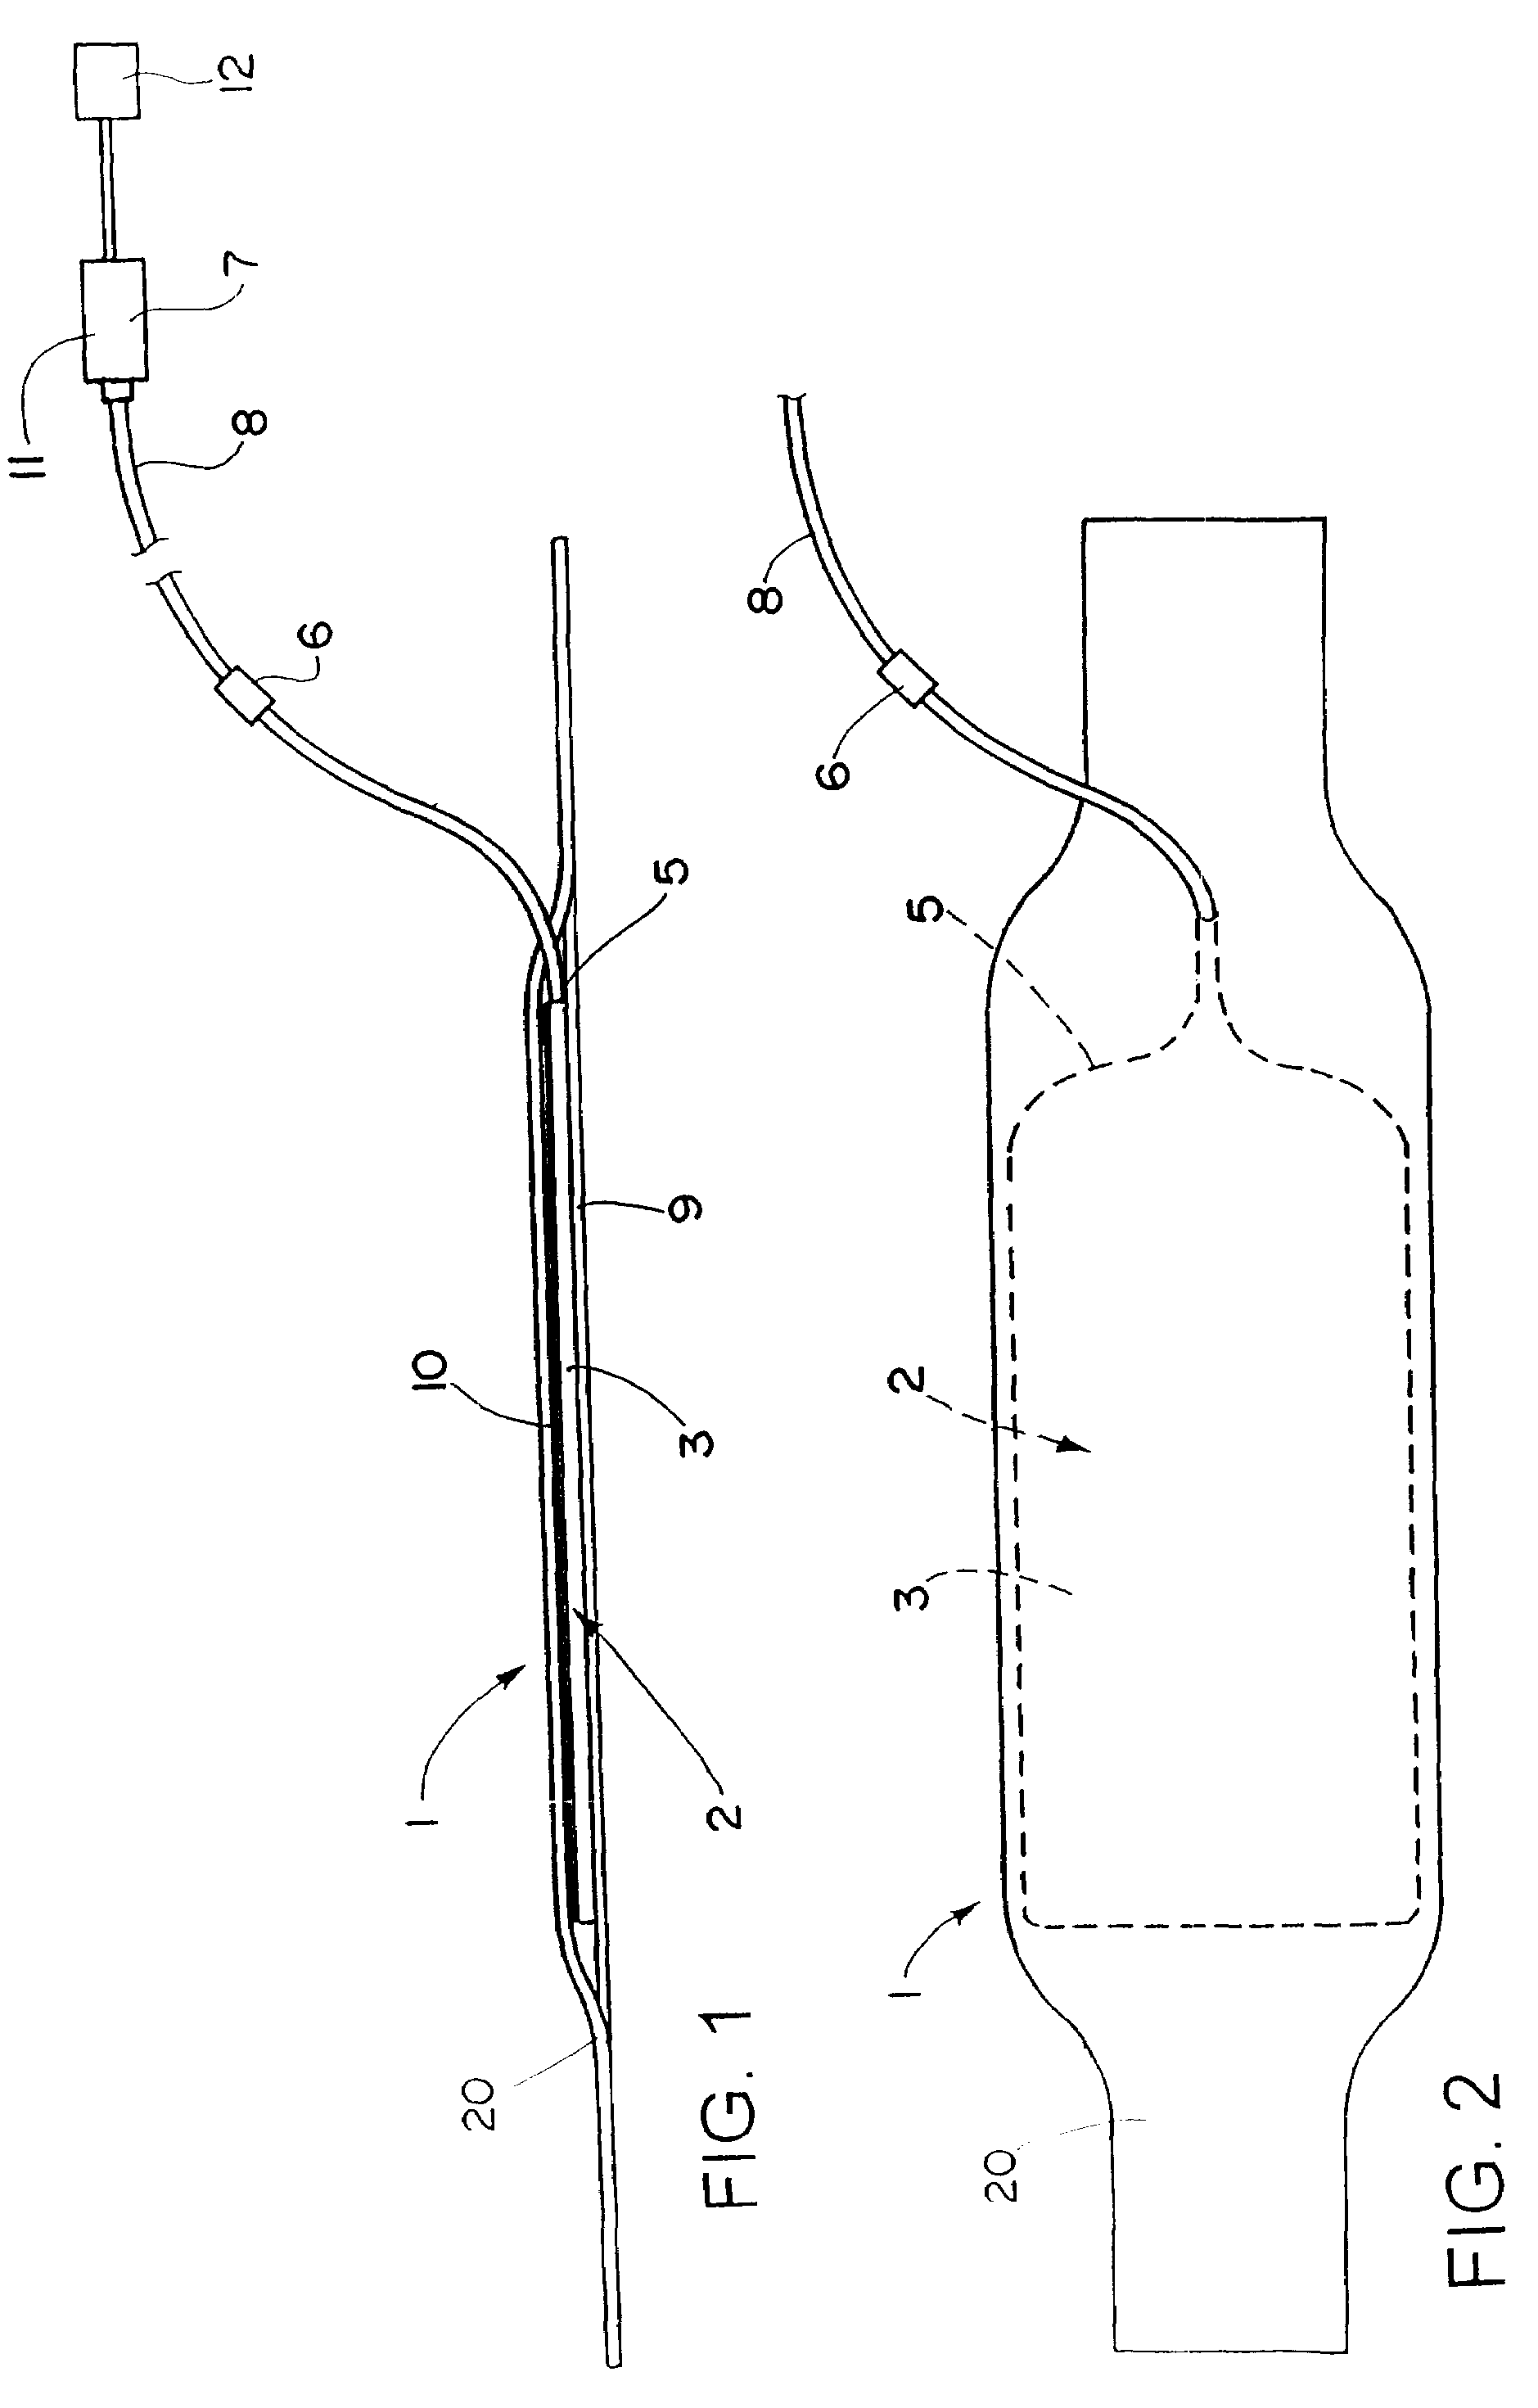 Phototherapy treatment devices for applying area lighting to a wound